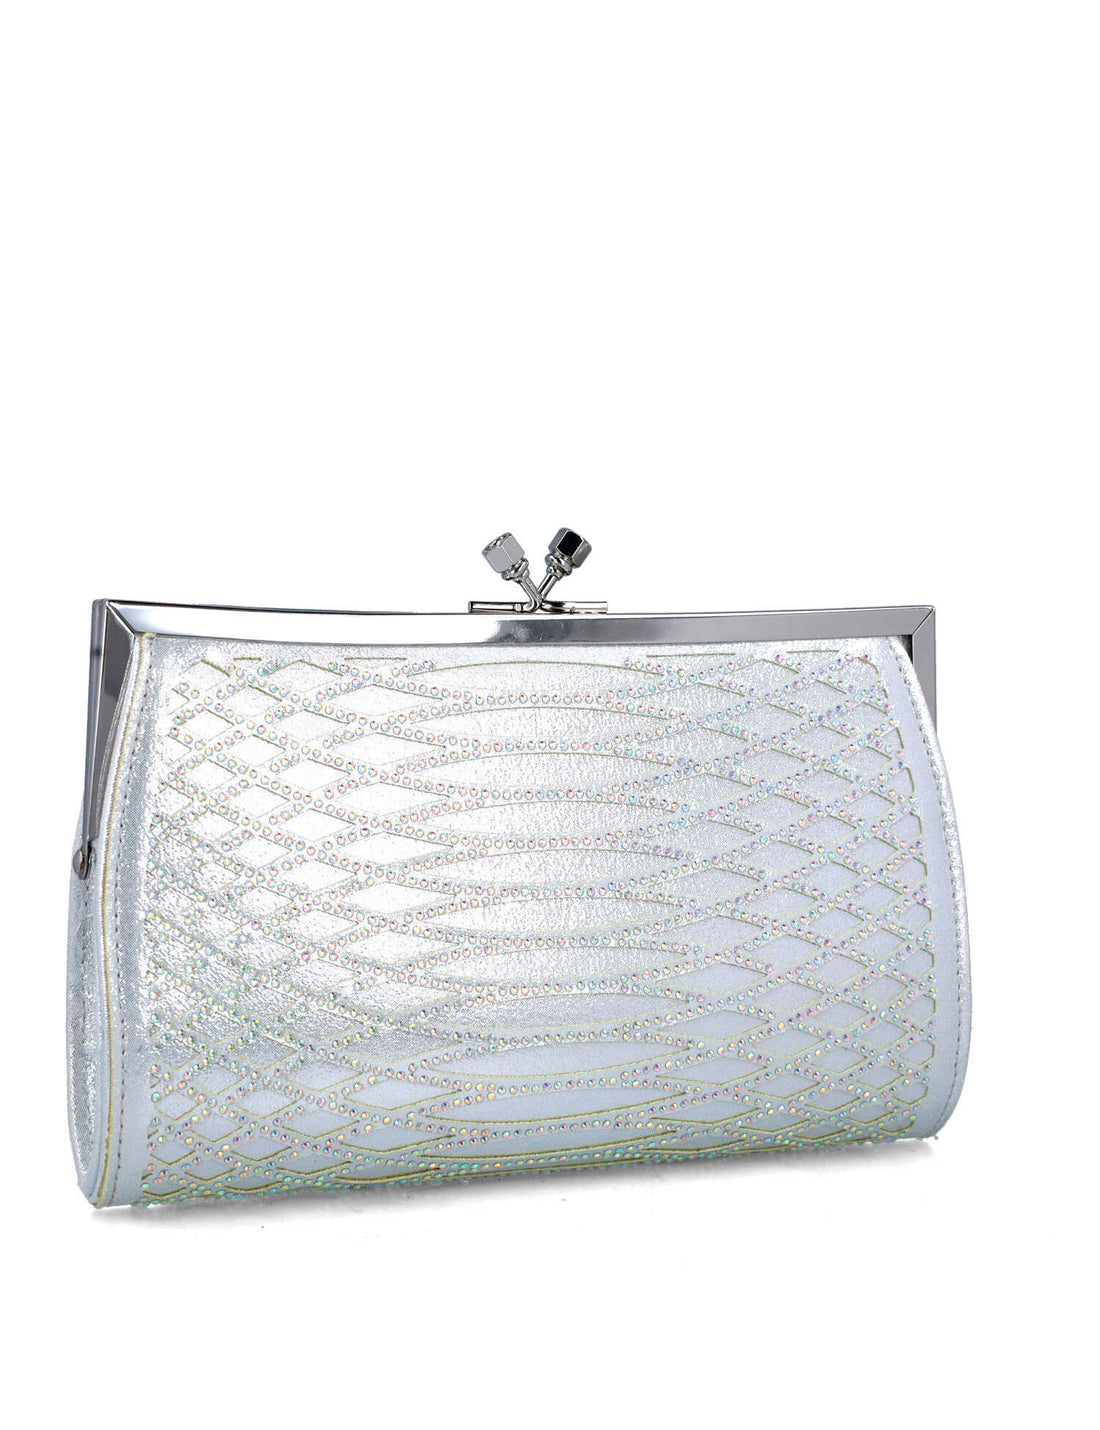 Silver Clutch In Imitation Snake Leather_85597_09_02